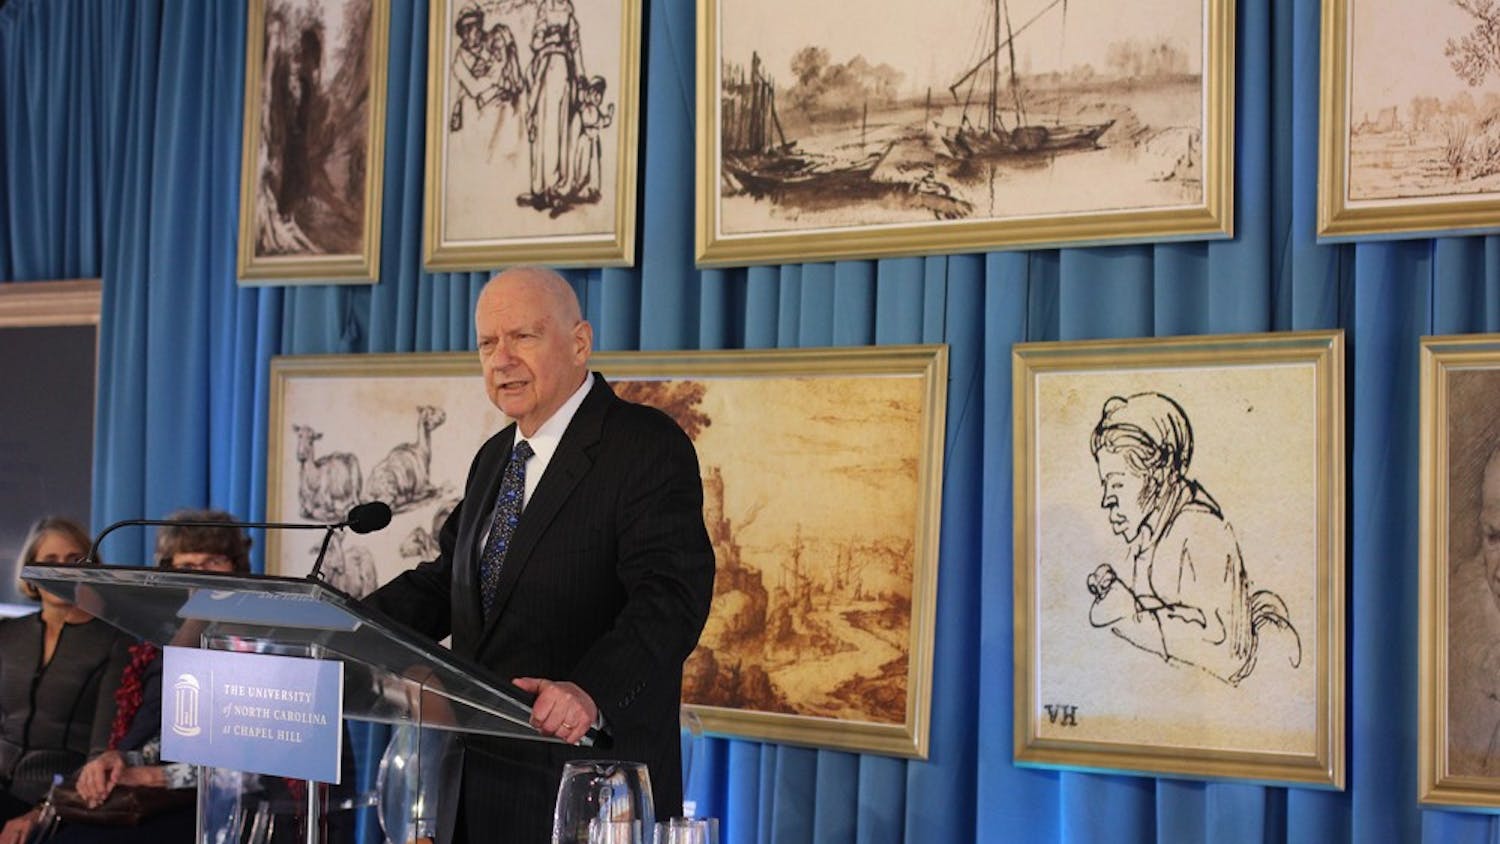 Sheldon Peck speaks at the donation announcement of various pieces of artwork to the Ackland Art Museum. Peck and his wife were the donors of the the collection, valued at $25 million and containing some of Rembrandt's most famous pieces.